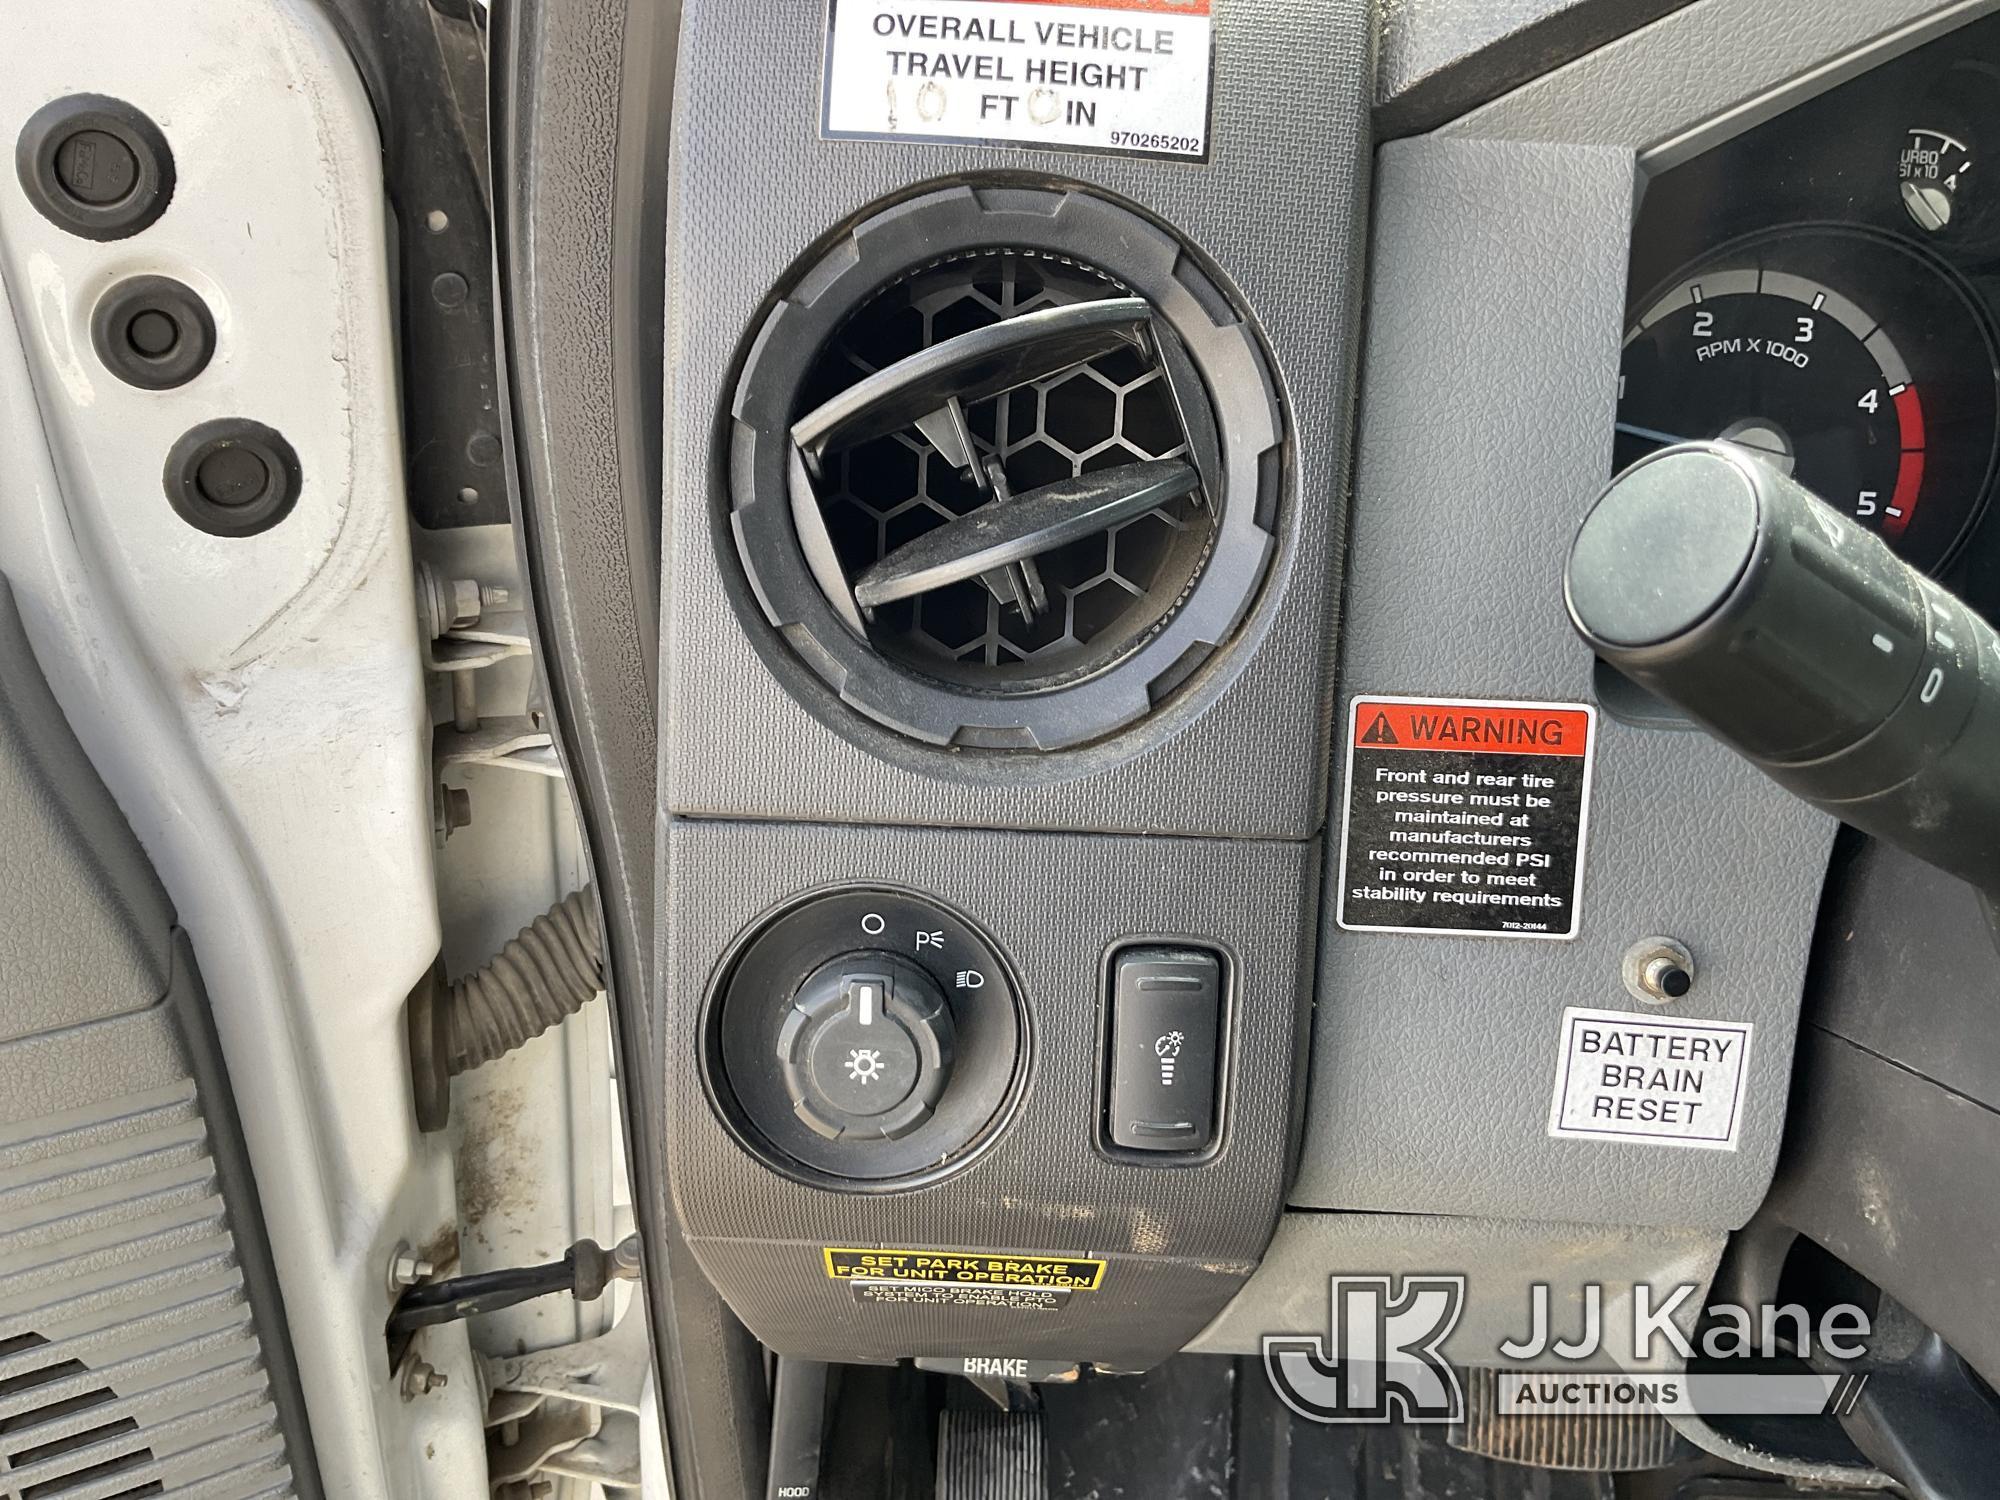 (Dixon, CA) Altec AT37G, mounted behind cab on 2012 Ford F550 4x4 Service Truck Runs & Moves, PTO En